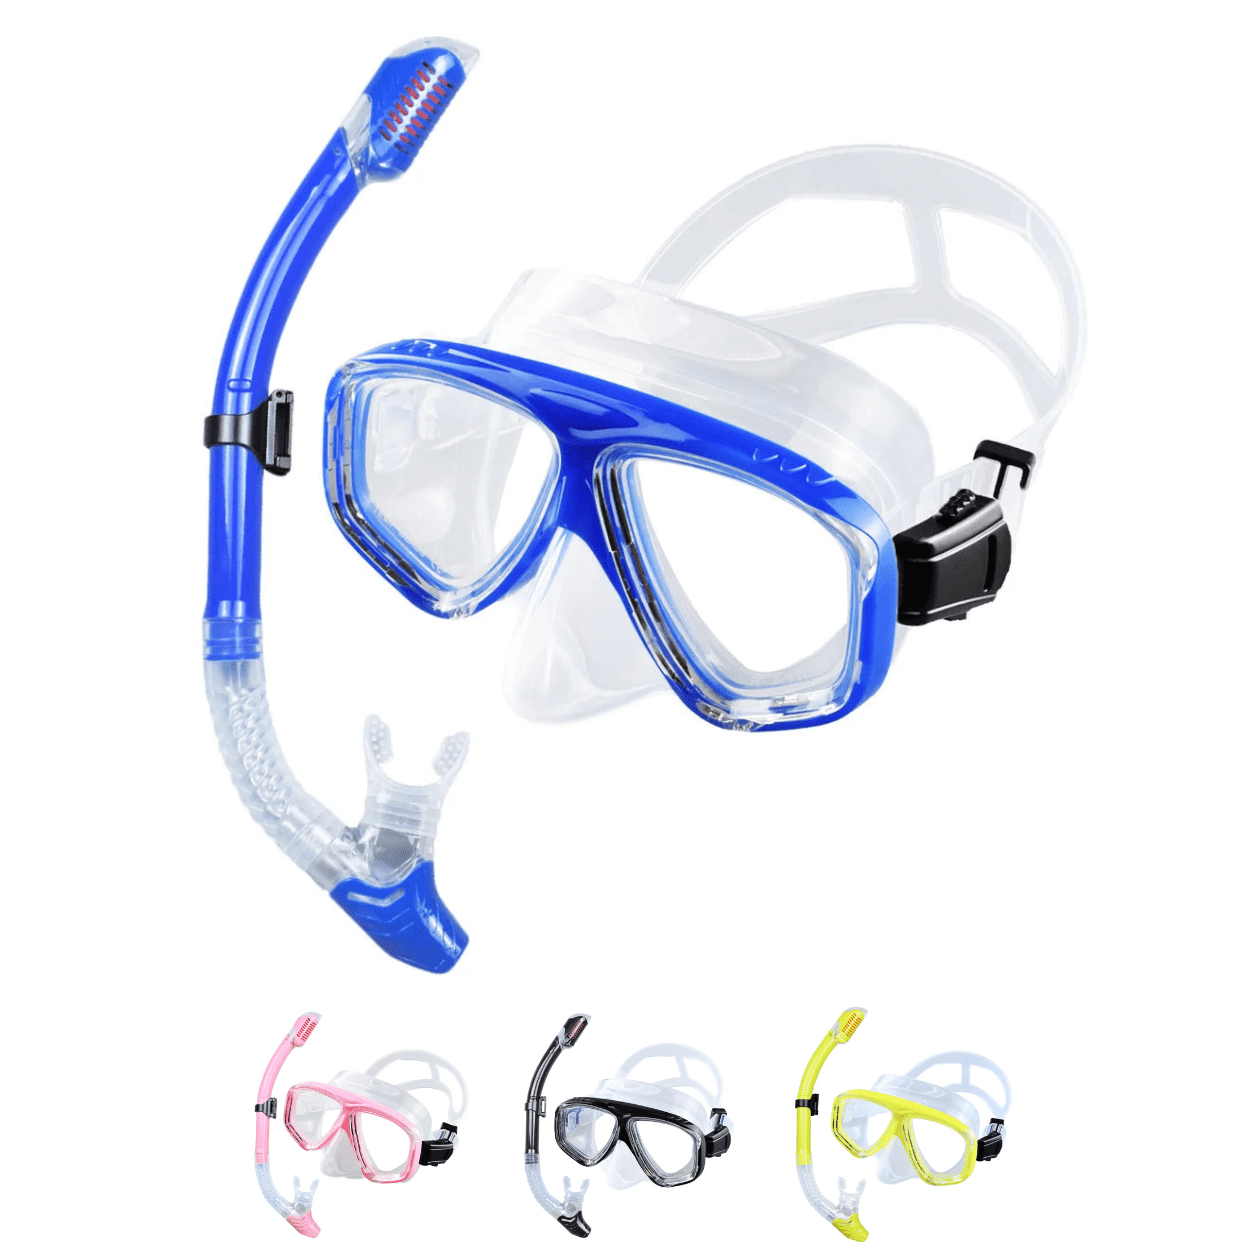 Mask and snorkel set The RX Obsidian Nearsighted Mask for Scuba and Snorkeling - Clear Set